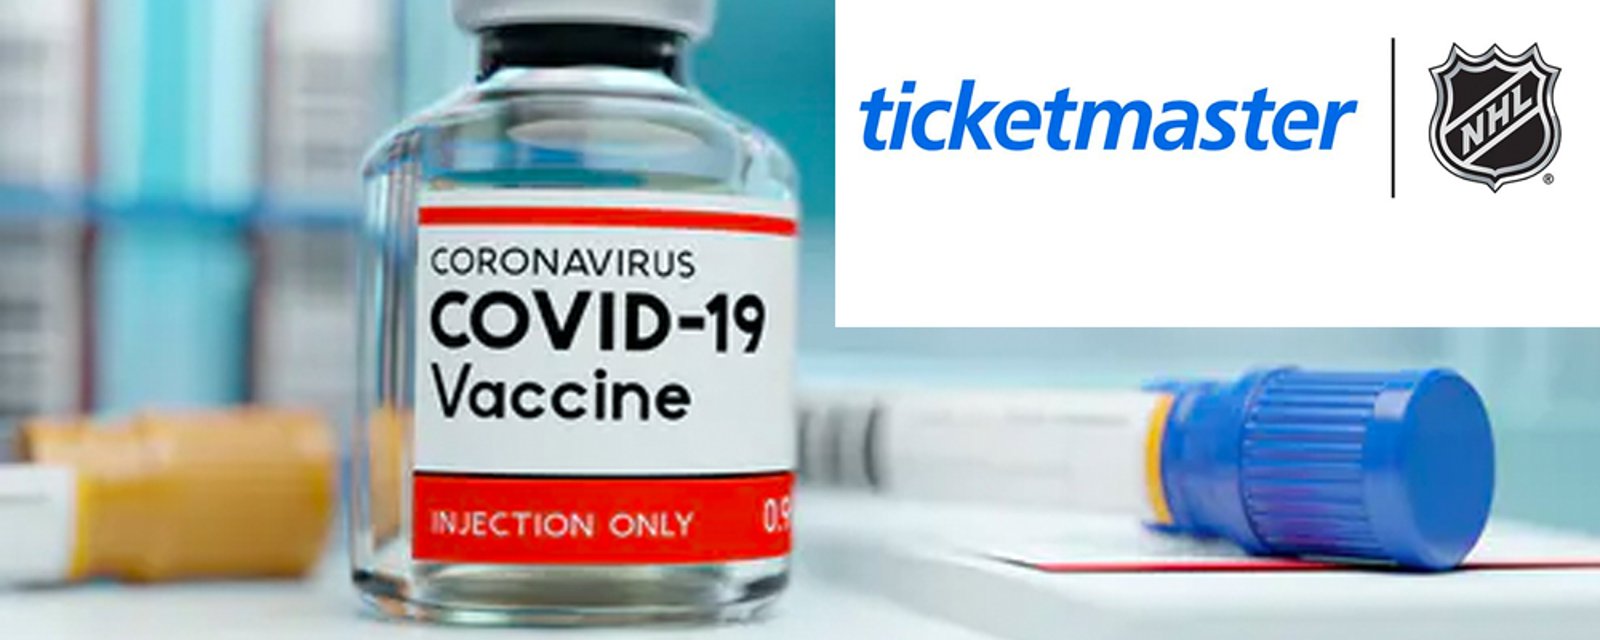 Report: Ticketmaster could require fans to provide proof of COVID-19 vaccination to attend NHL games 